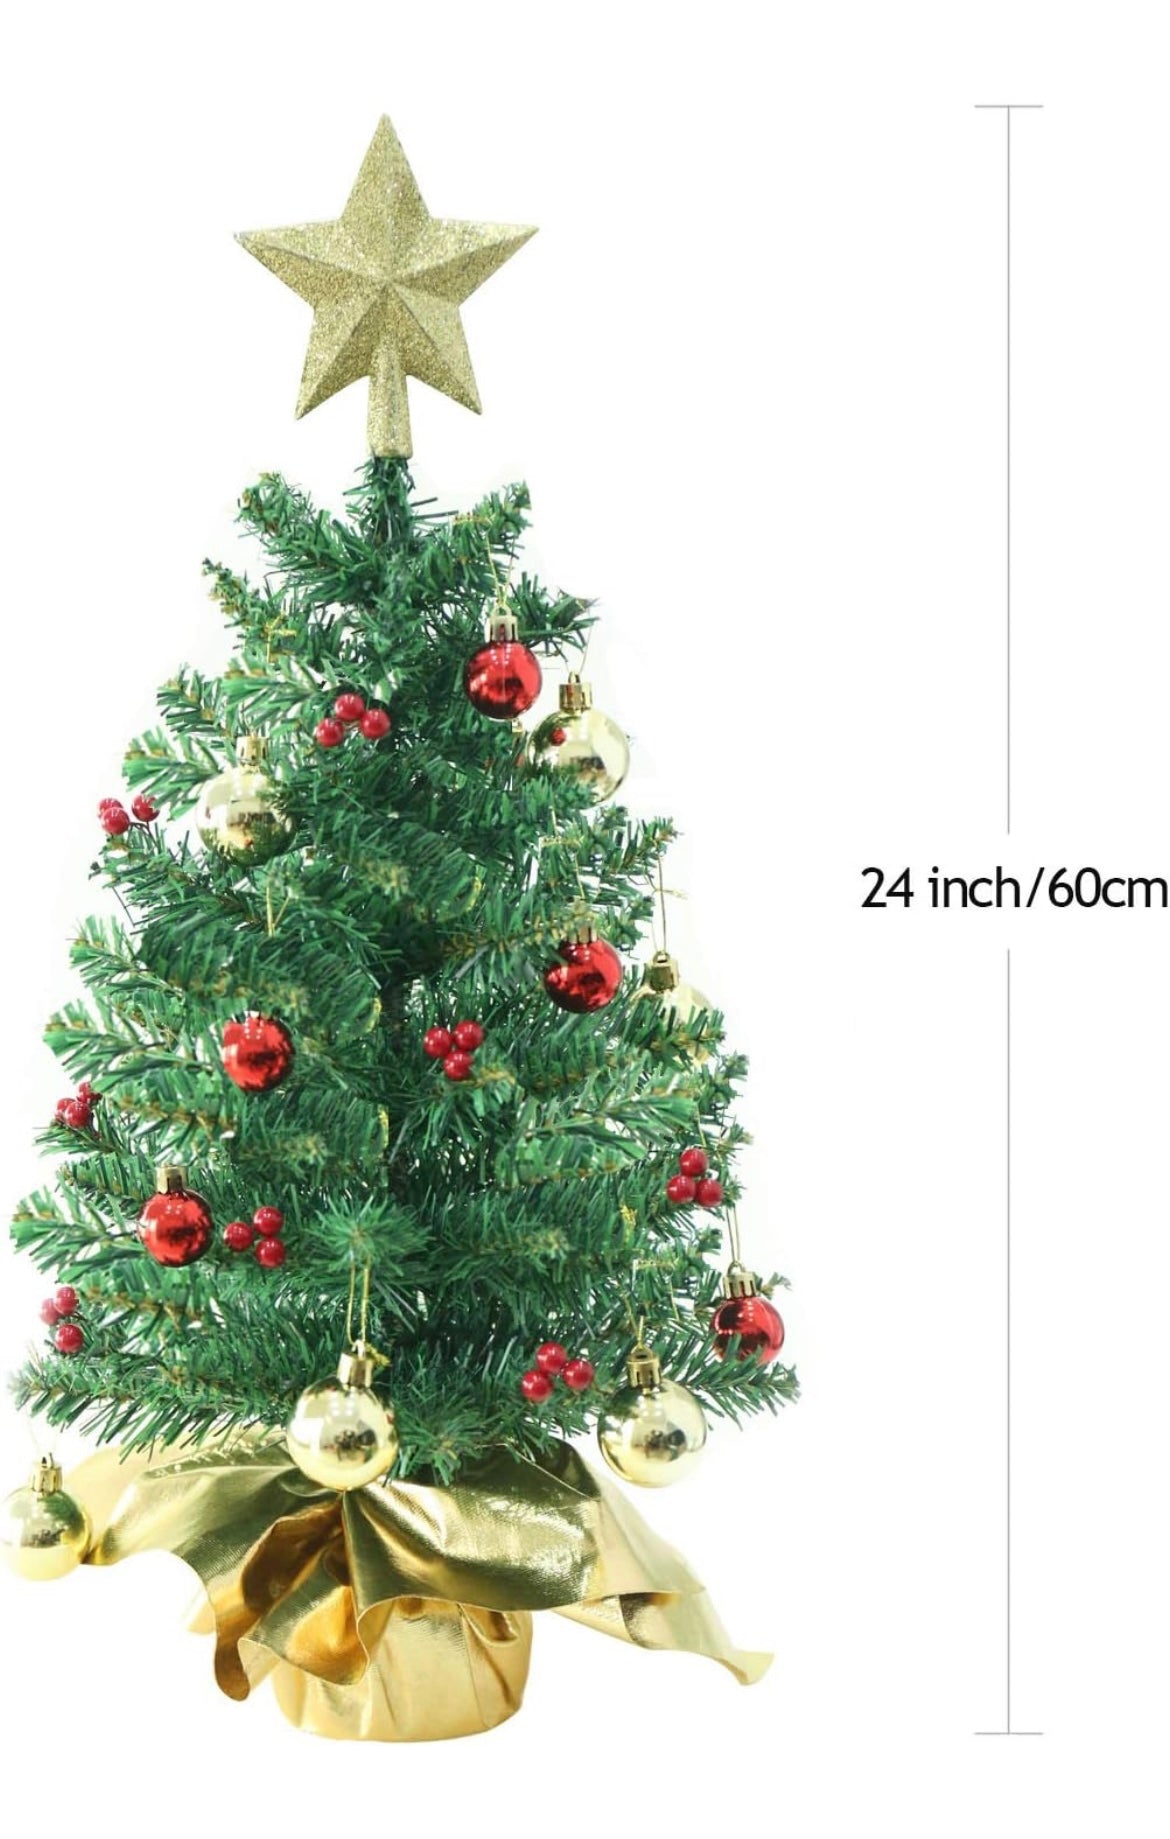 Liecho 24 Inch Tabletop Mini Christmas Tree, Miniature Pine Christmas Tree with Hanging Ornaments, Battery Operated Artificial Xmas Tree, Best DIY Christmas Decorations-Gold